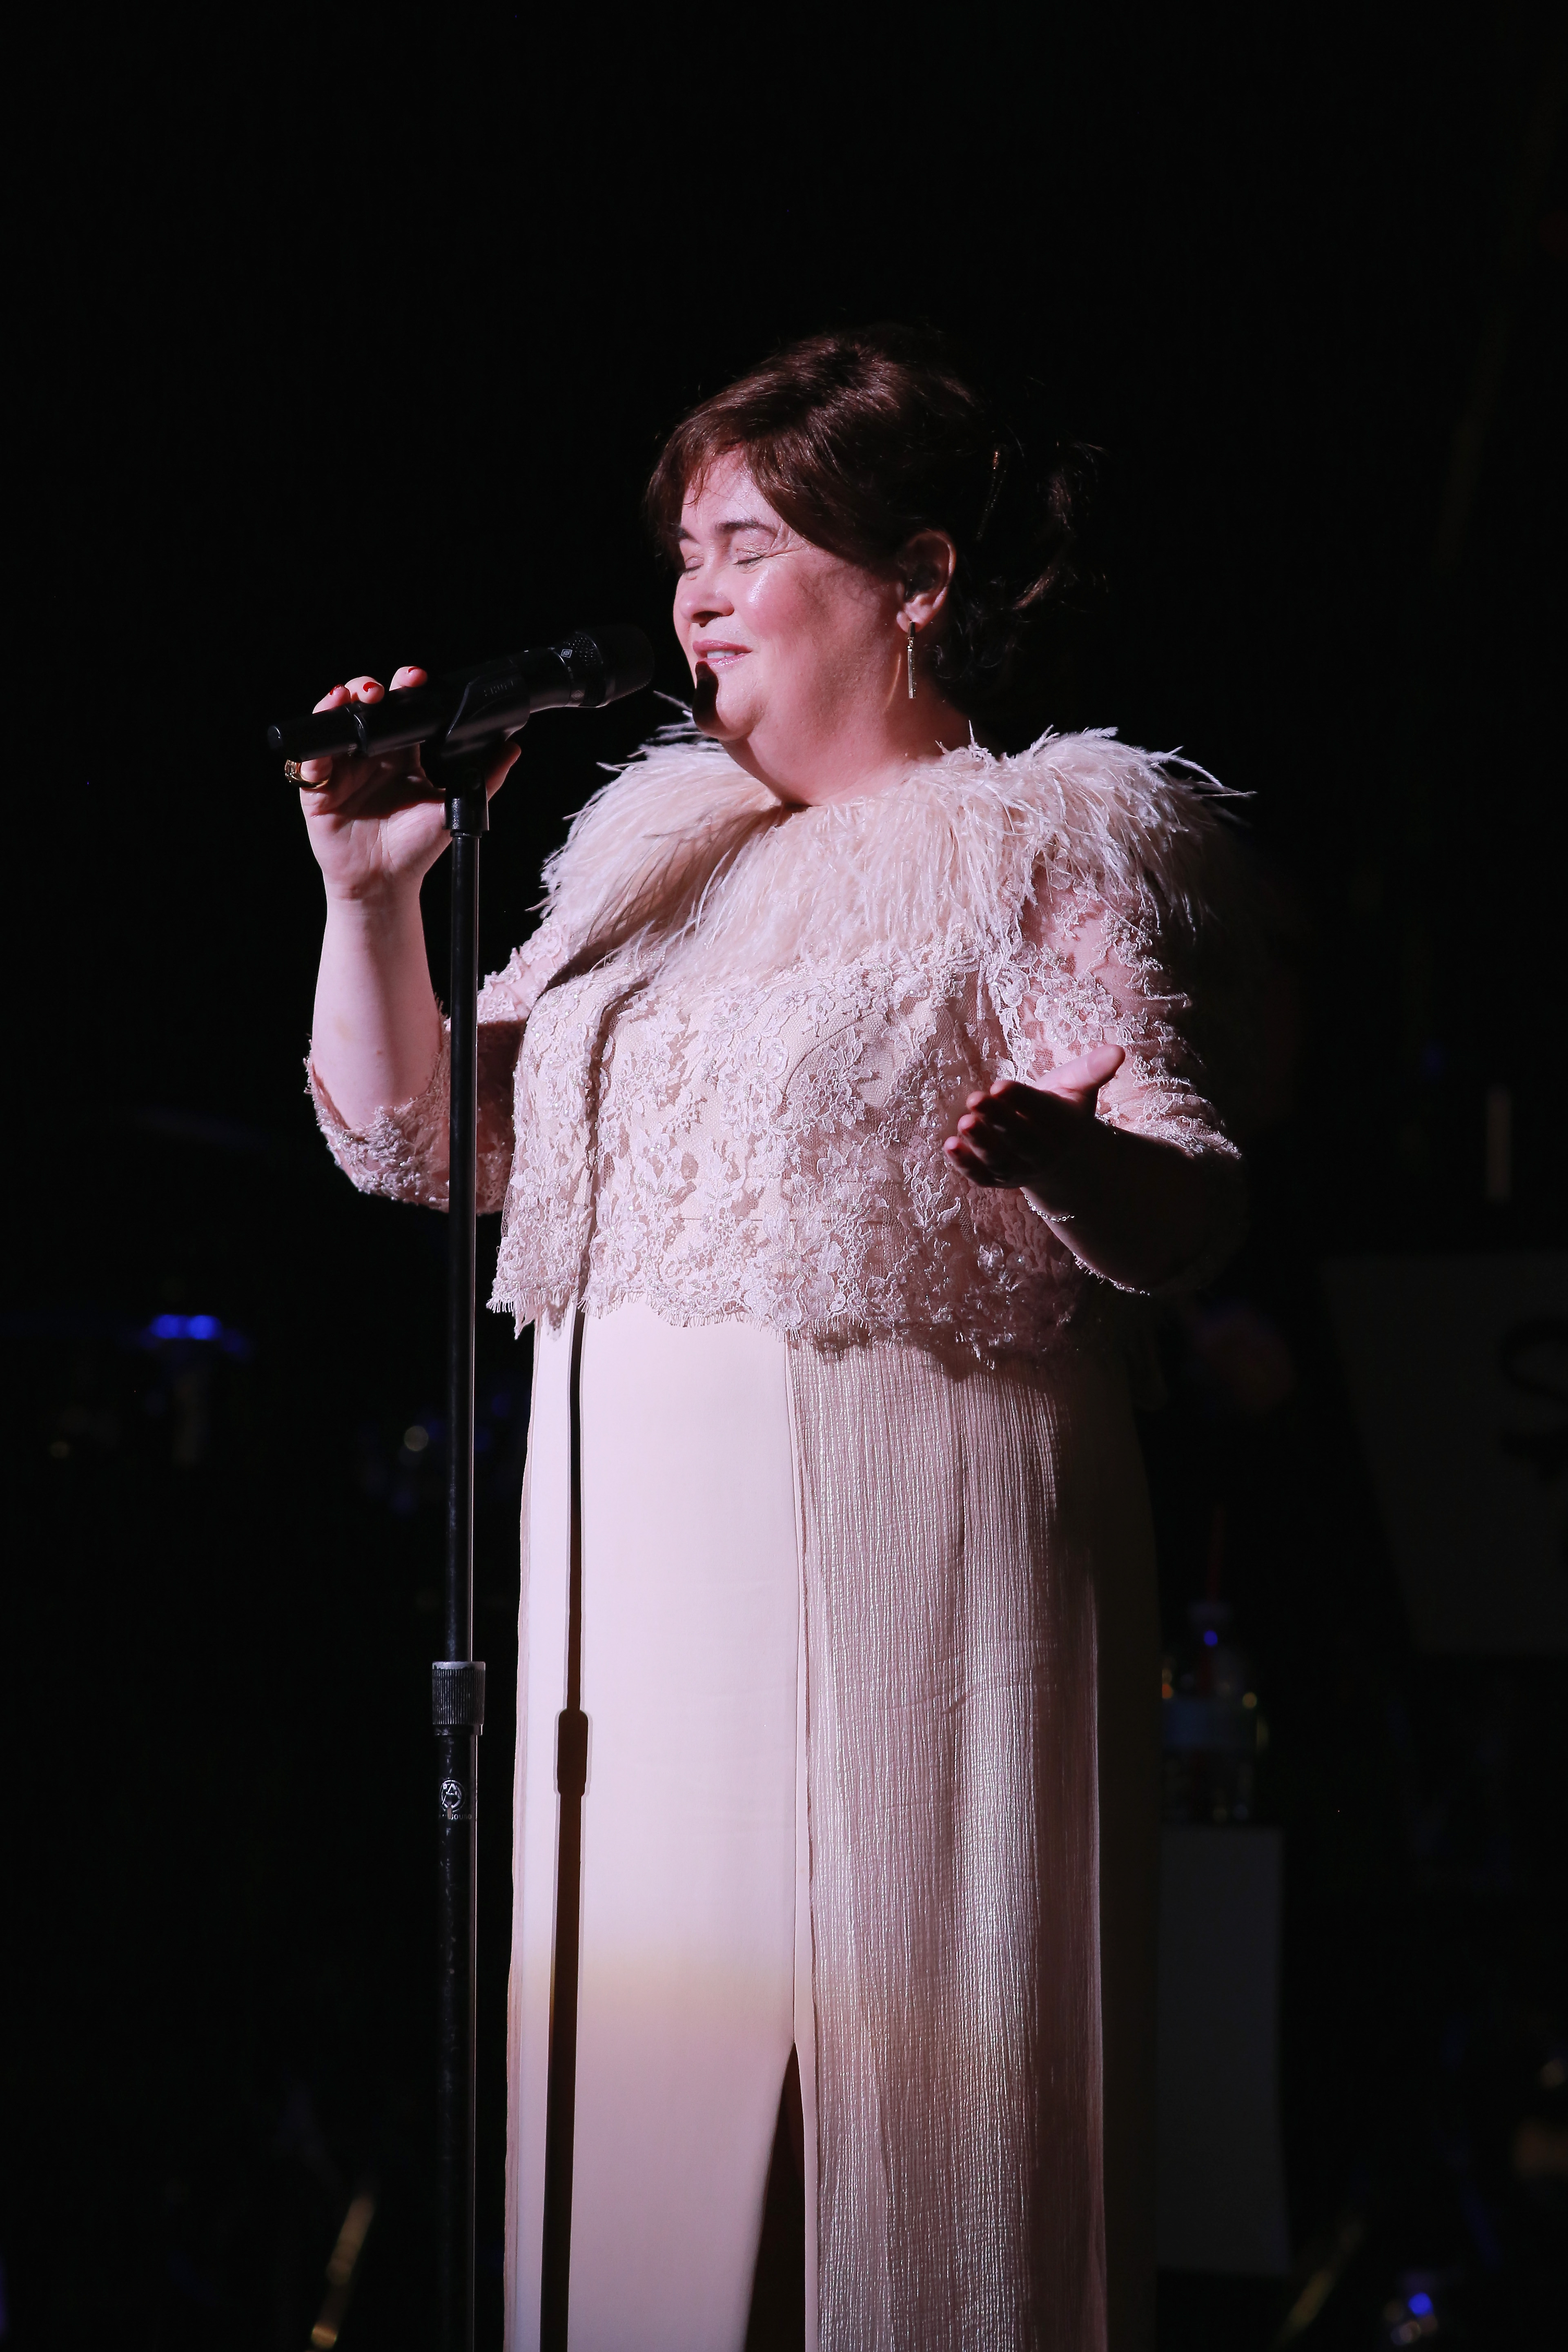 Susan Boyle performs at the Balboa Theater on October 8, 2014 in San Diego, California | Source: Getty Images